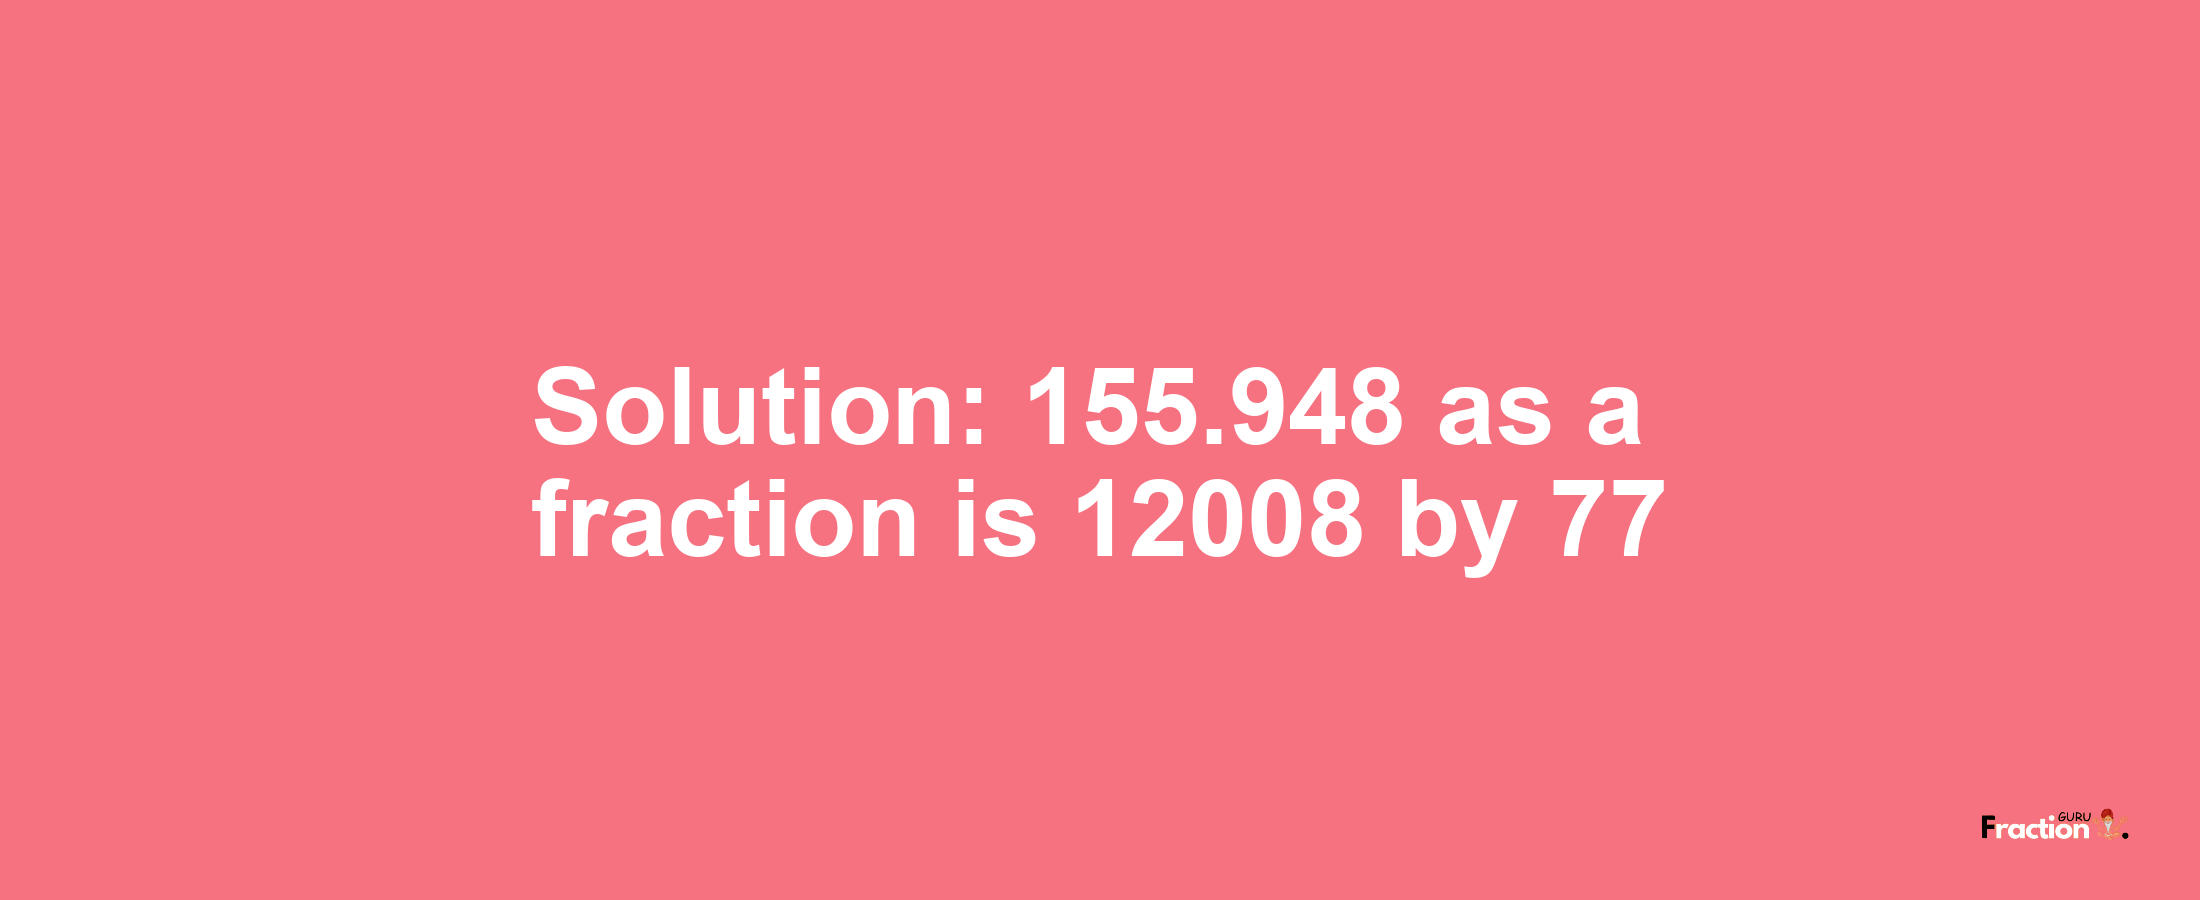 Solution:155.948 as a fraction is 12008/77